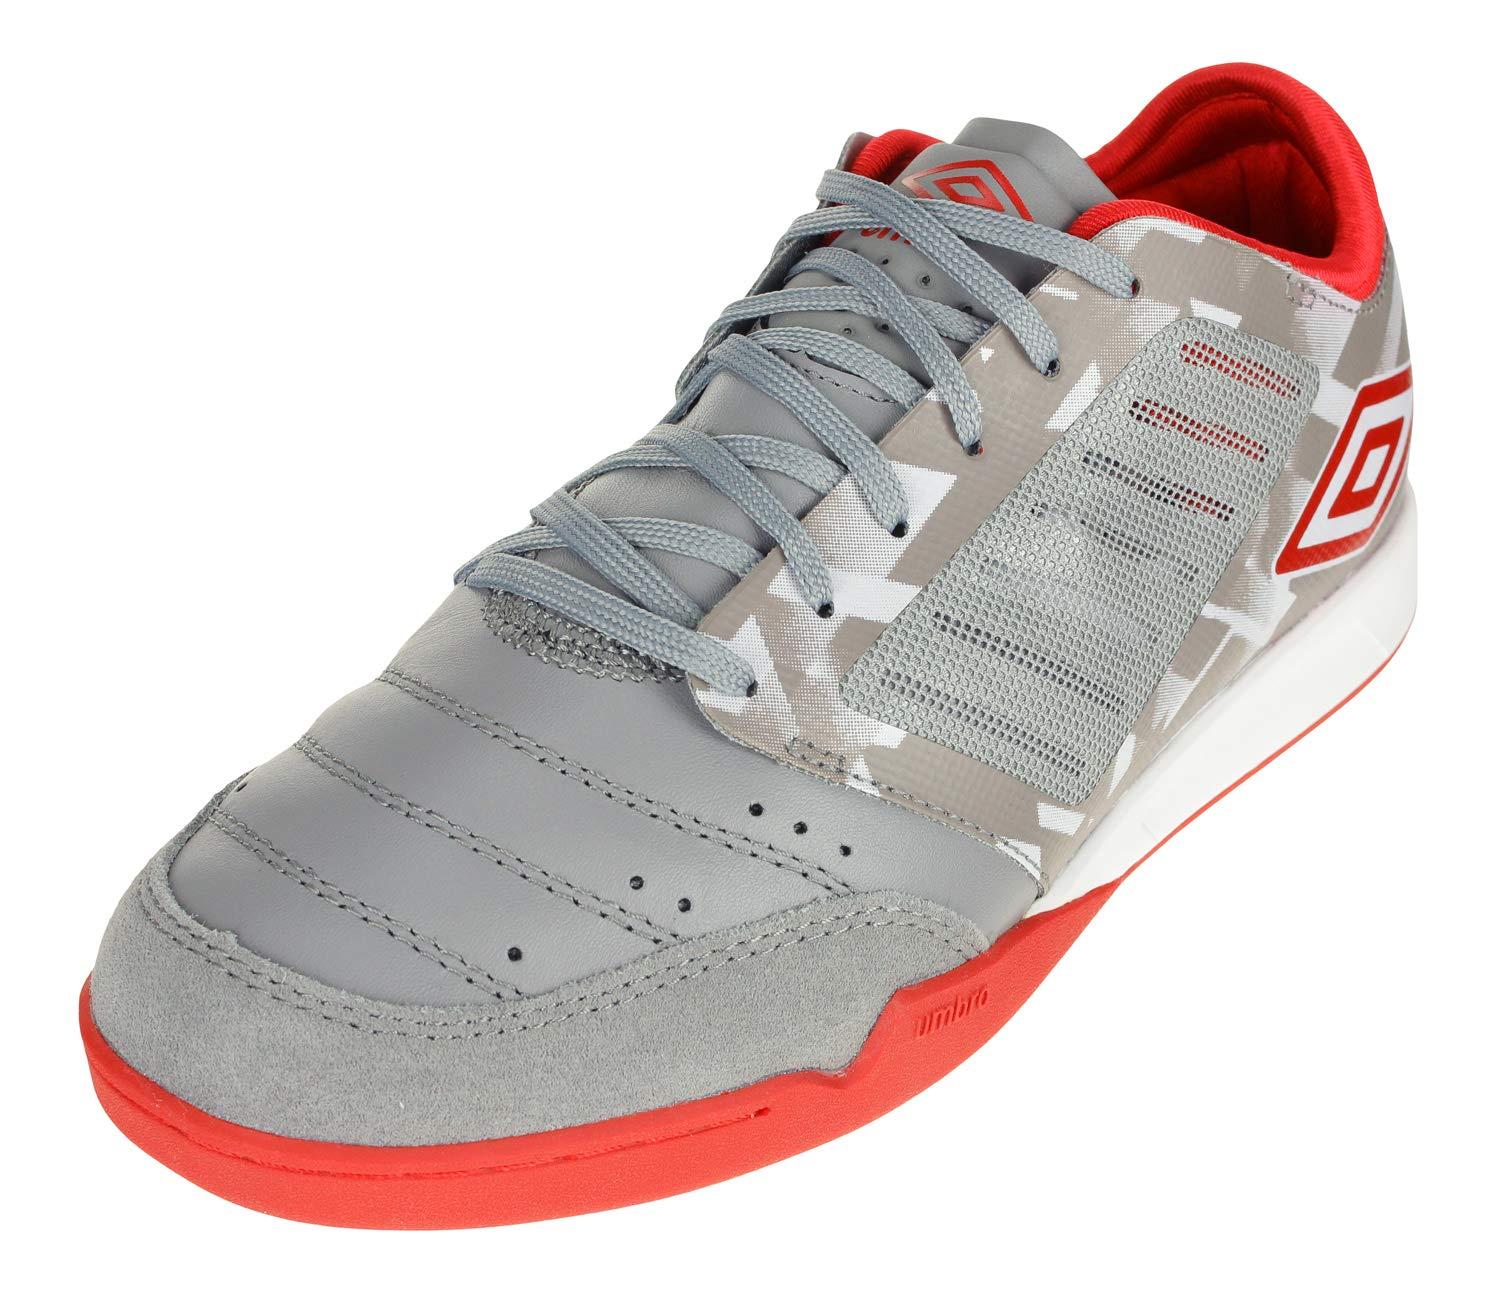 Umbro Leather Chaleira Pro Indoor Soccer Shoe in Grey (Gray) for Men - Save  7% - Lyst